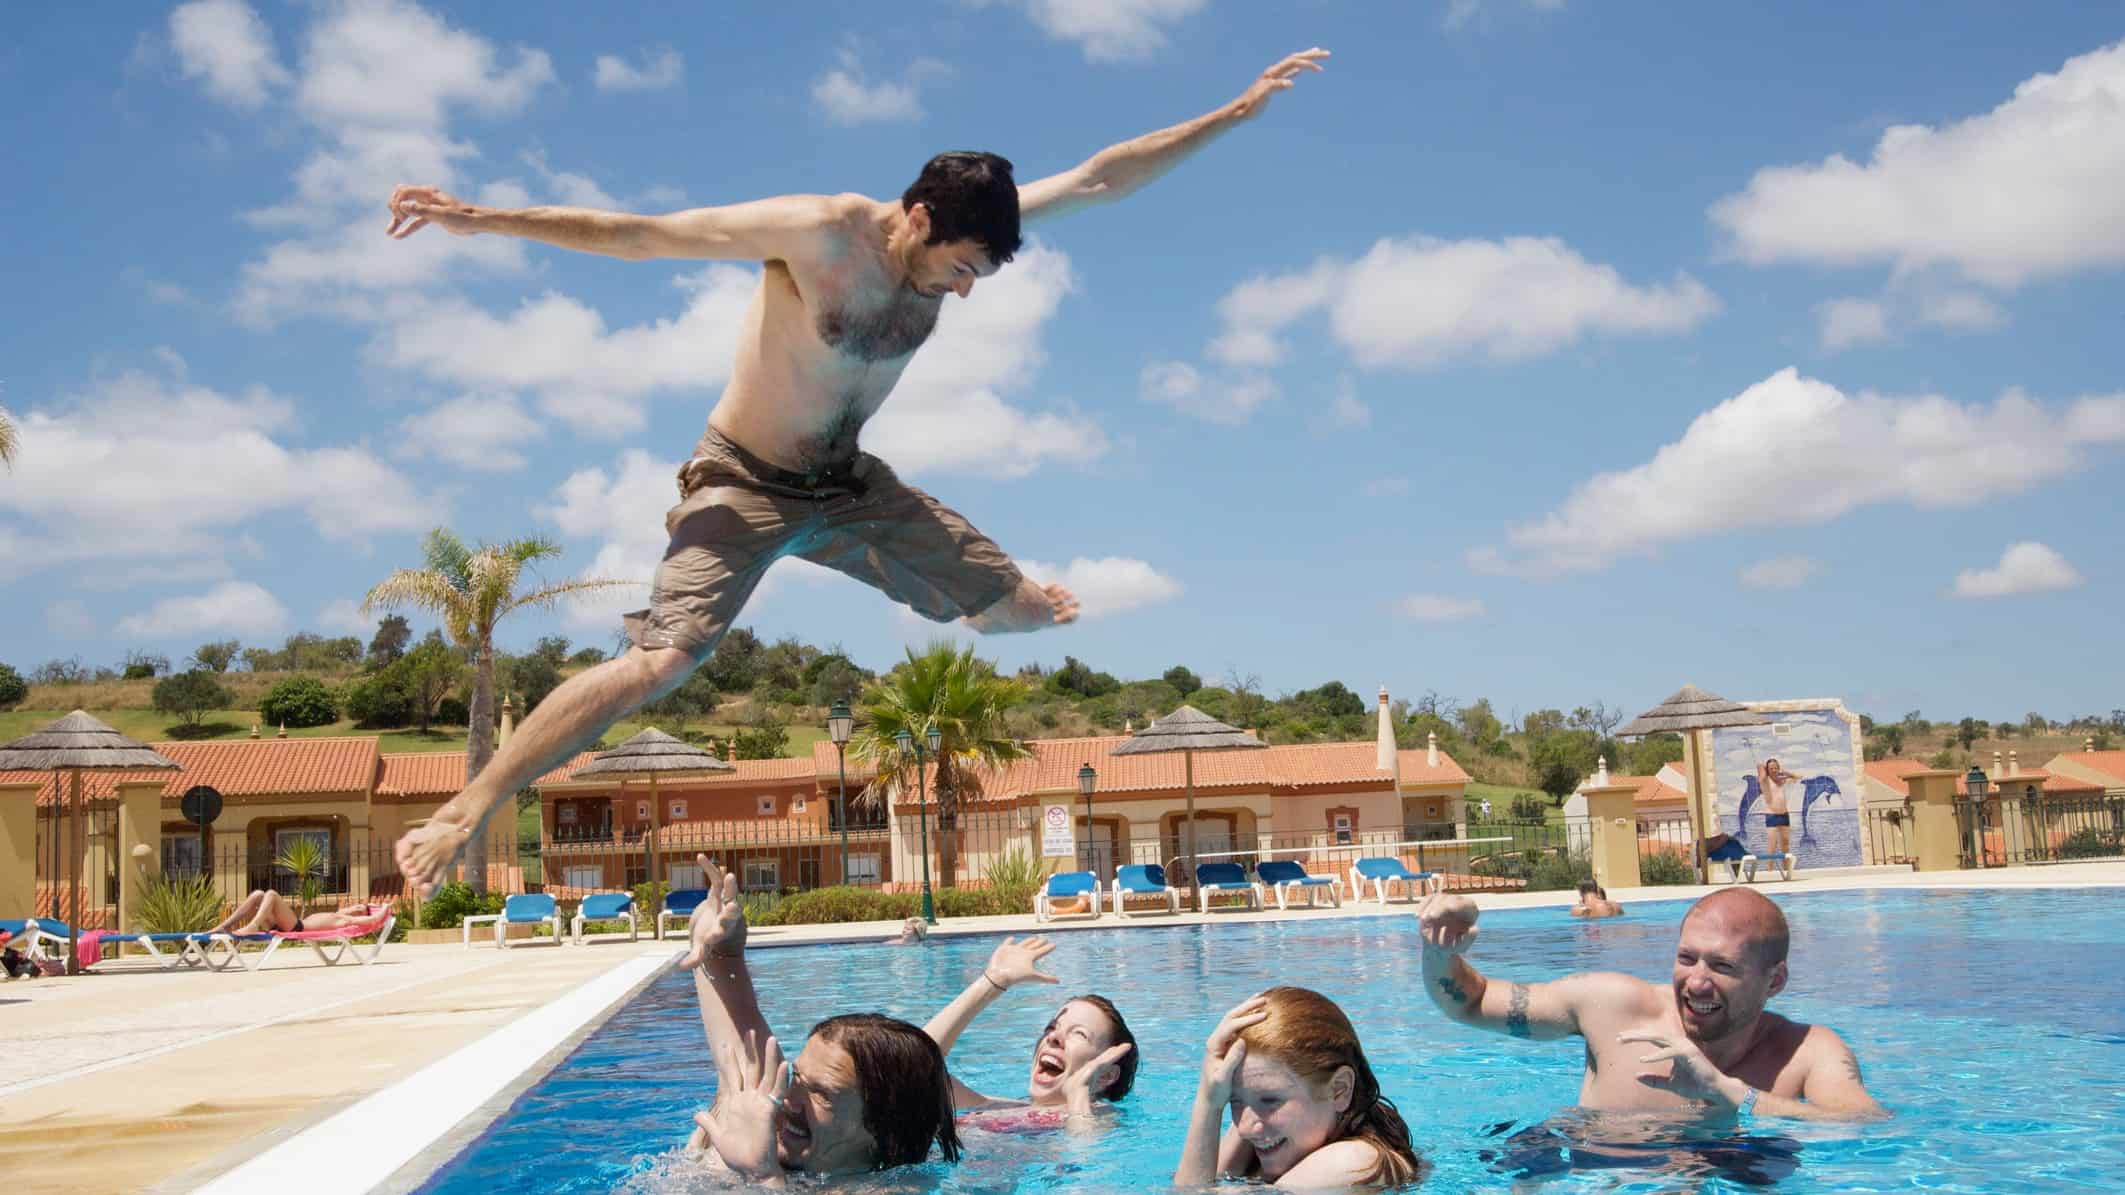 A man leaps as high as he can over his friends into a pool.